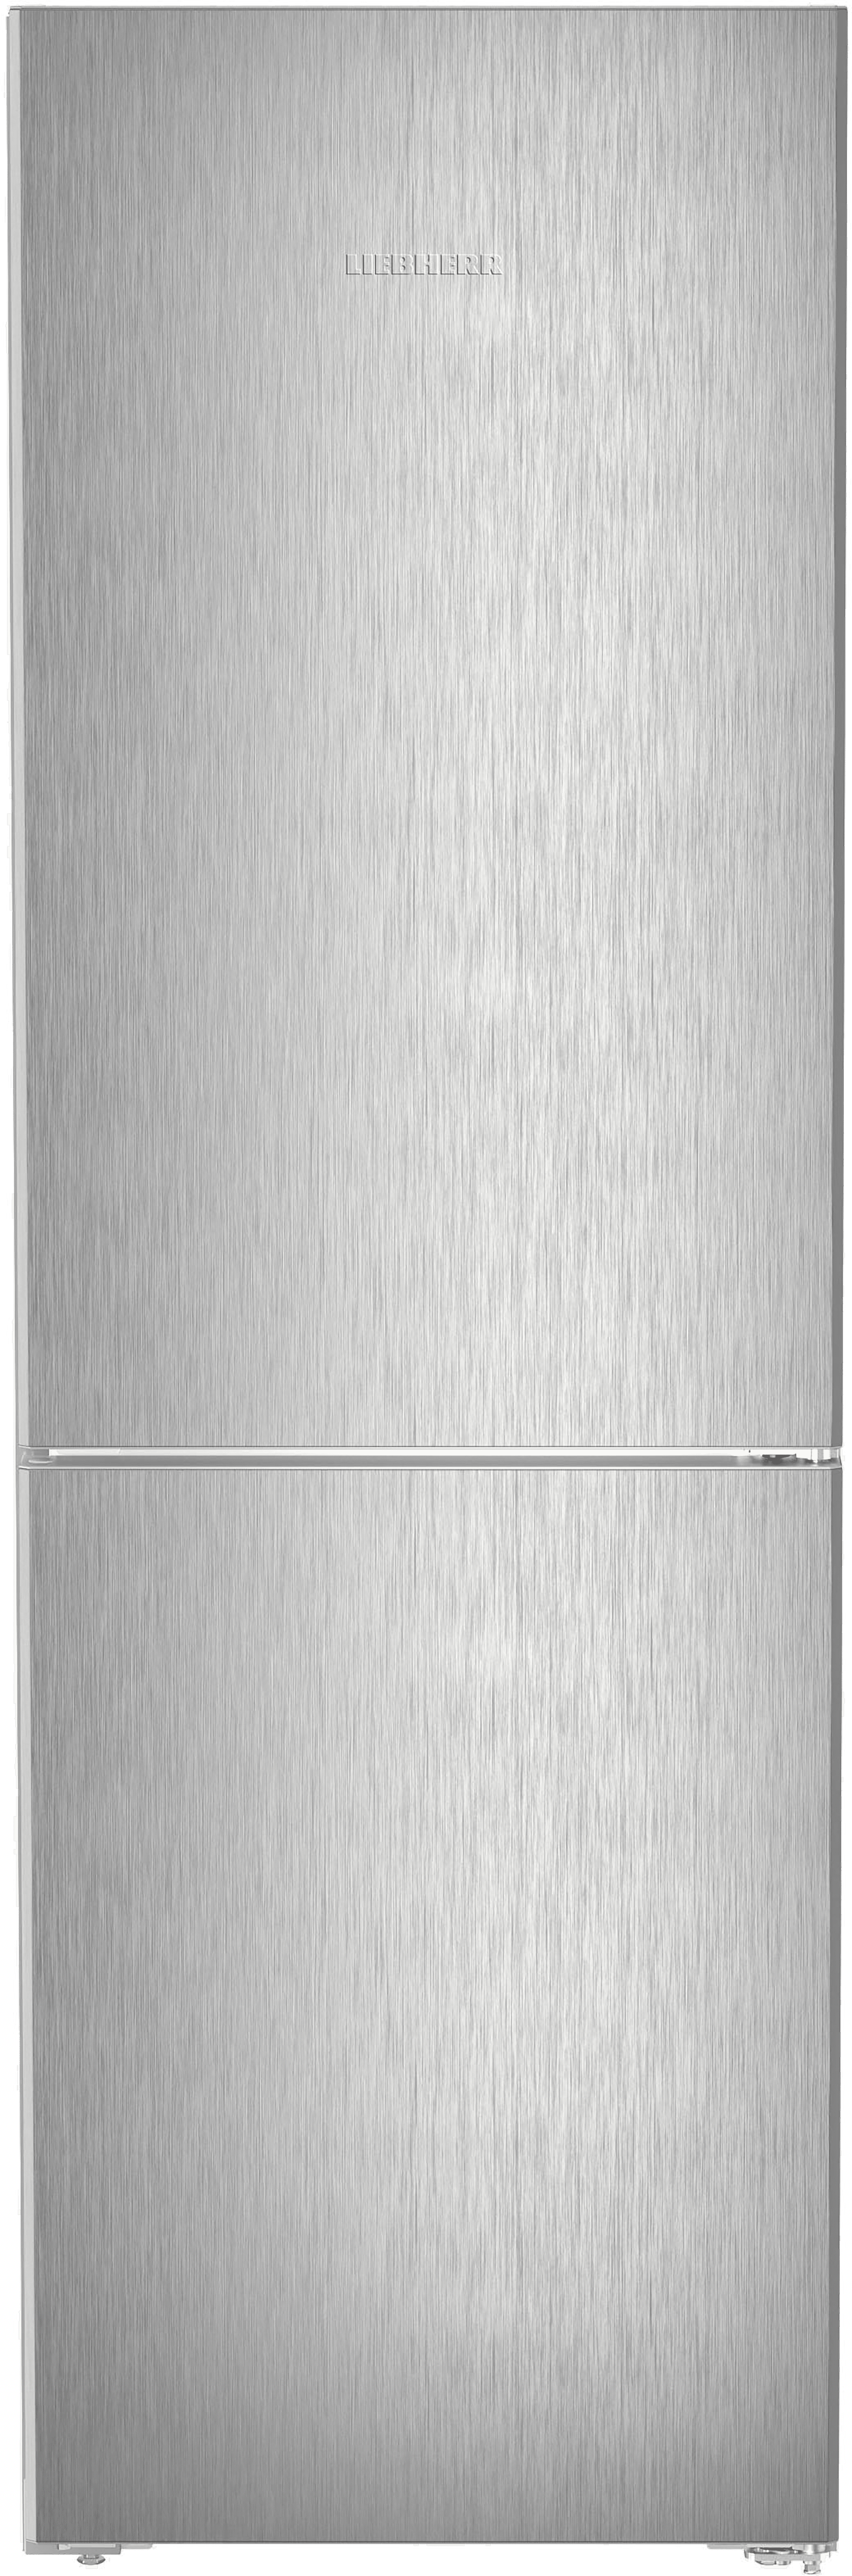 Liebherr CNsfd5203 Wifi Connected 60/40 Frost Free Fridge Freezer - Stainless Steel - D Rated, Stainless Steel